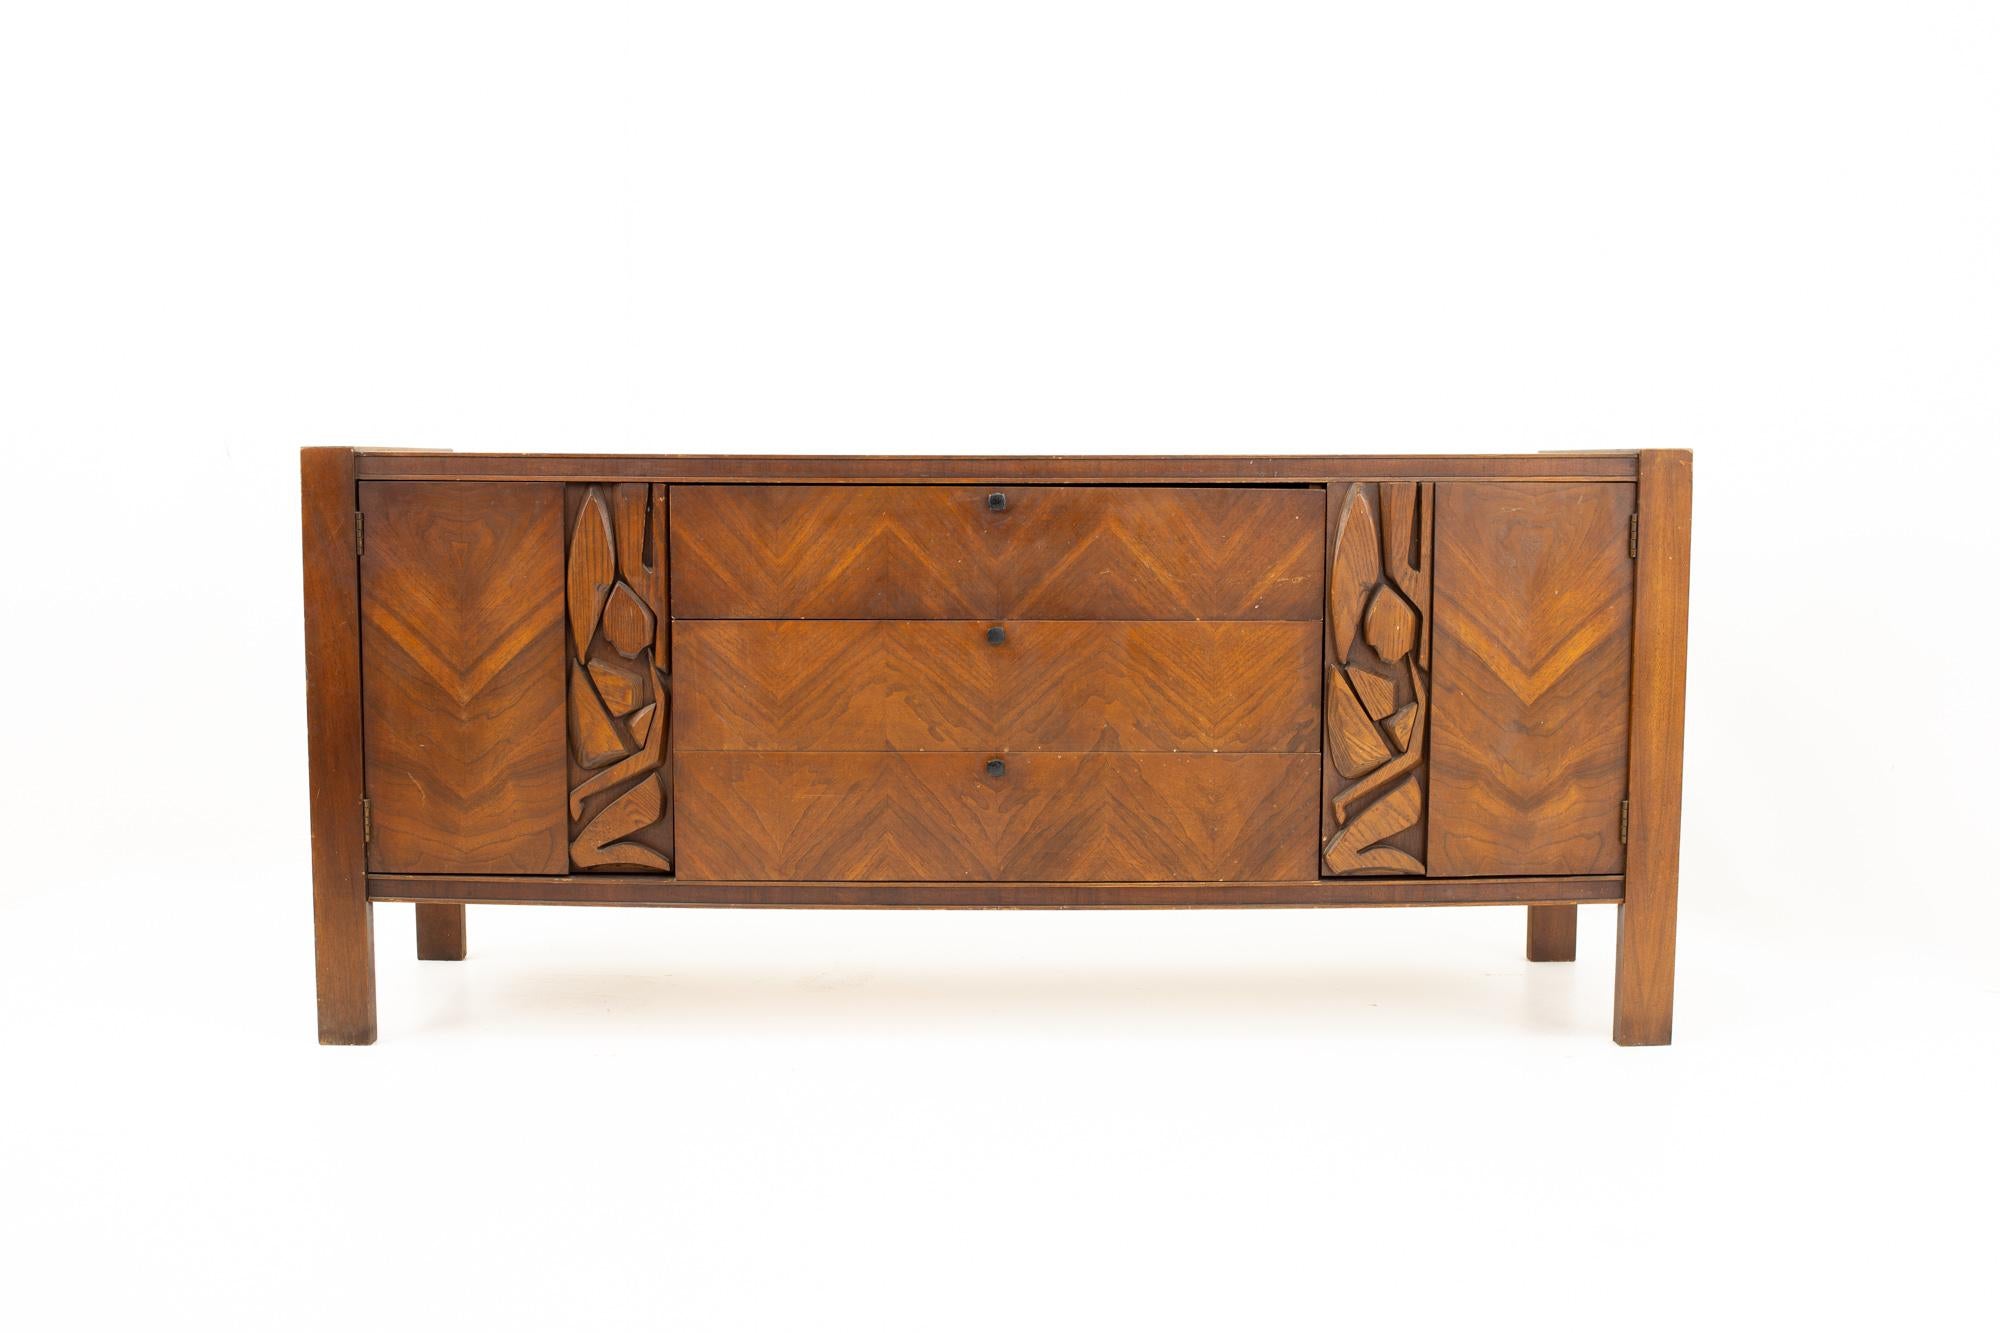 United Furniture mid century Brutalist walnut 9 drawer lowboy dresser

Dresser measures: 74 wide x 20.25 deep x 32.75 high

All pieces of furniture can be had in what we call restored vintage condition. That means the piece is restored upon